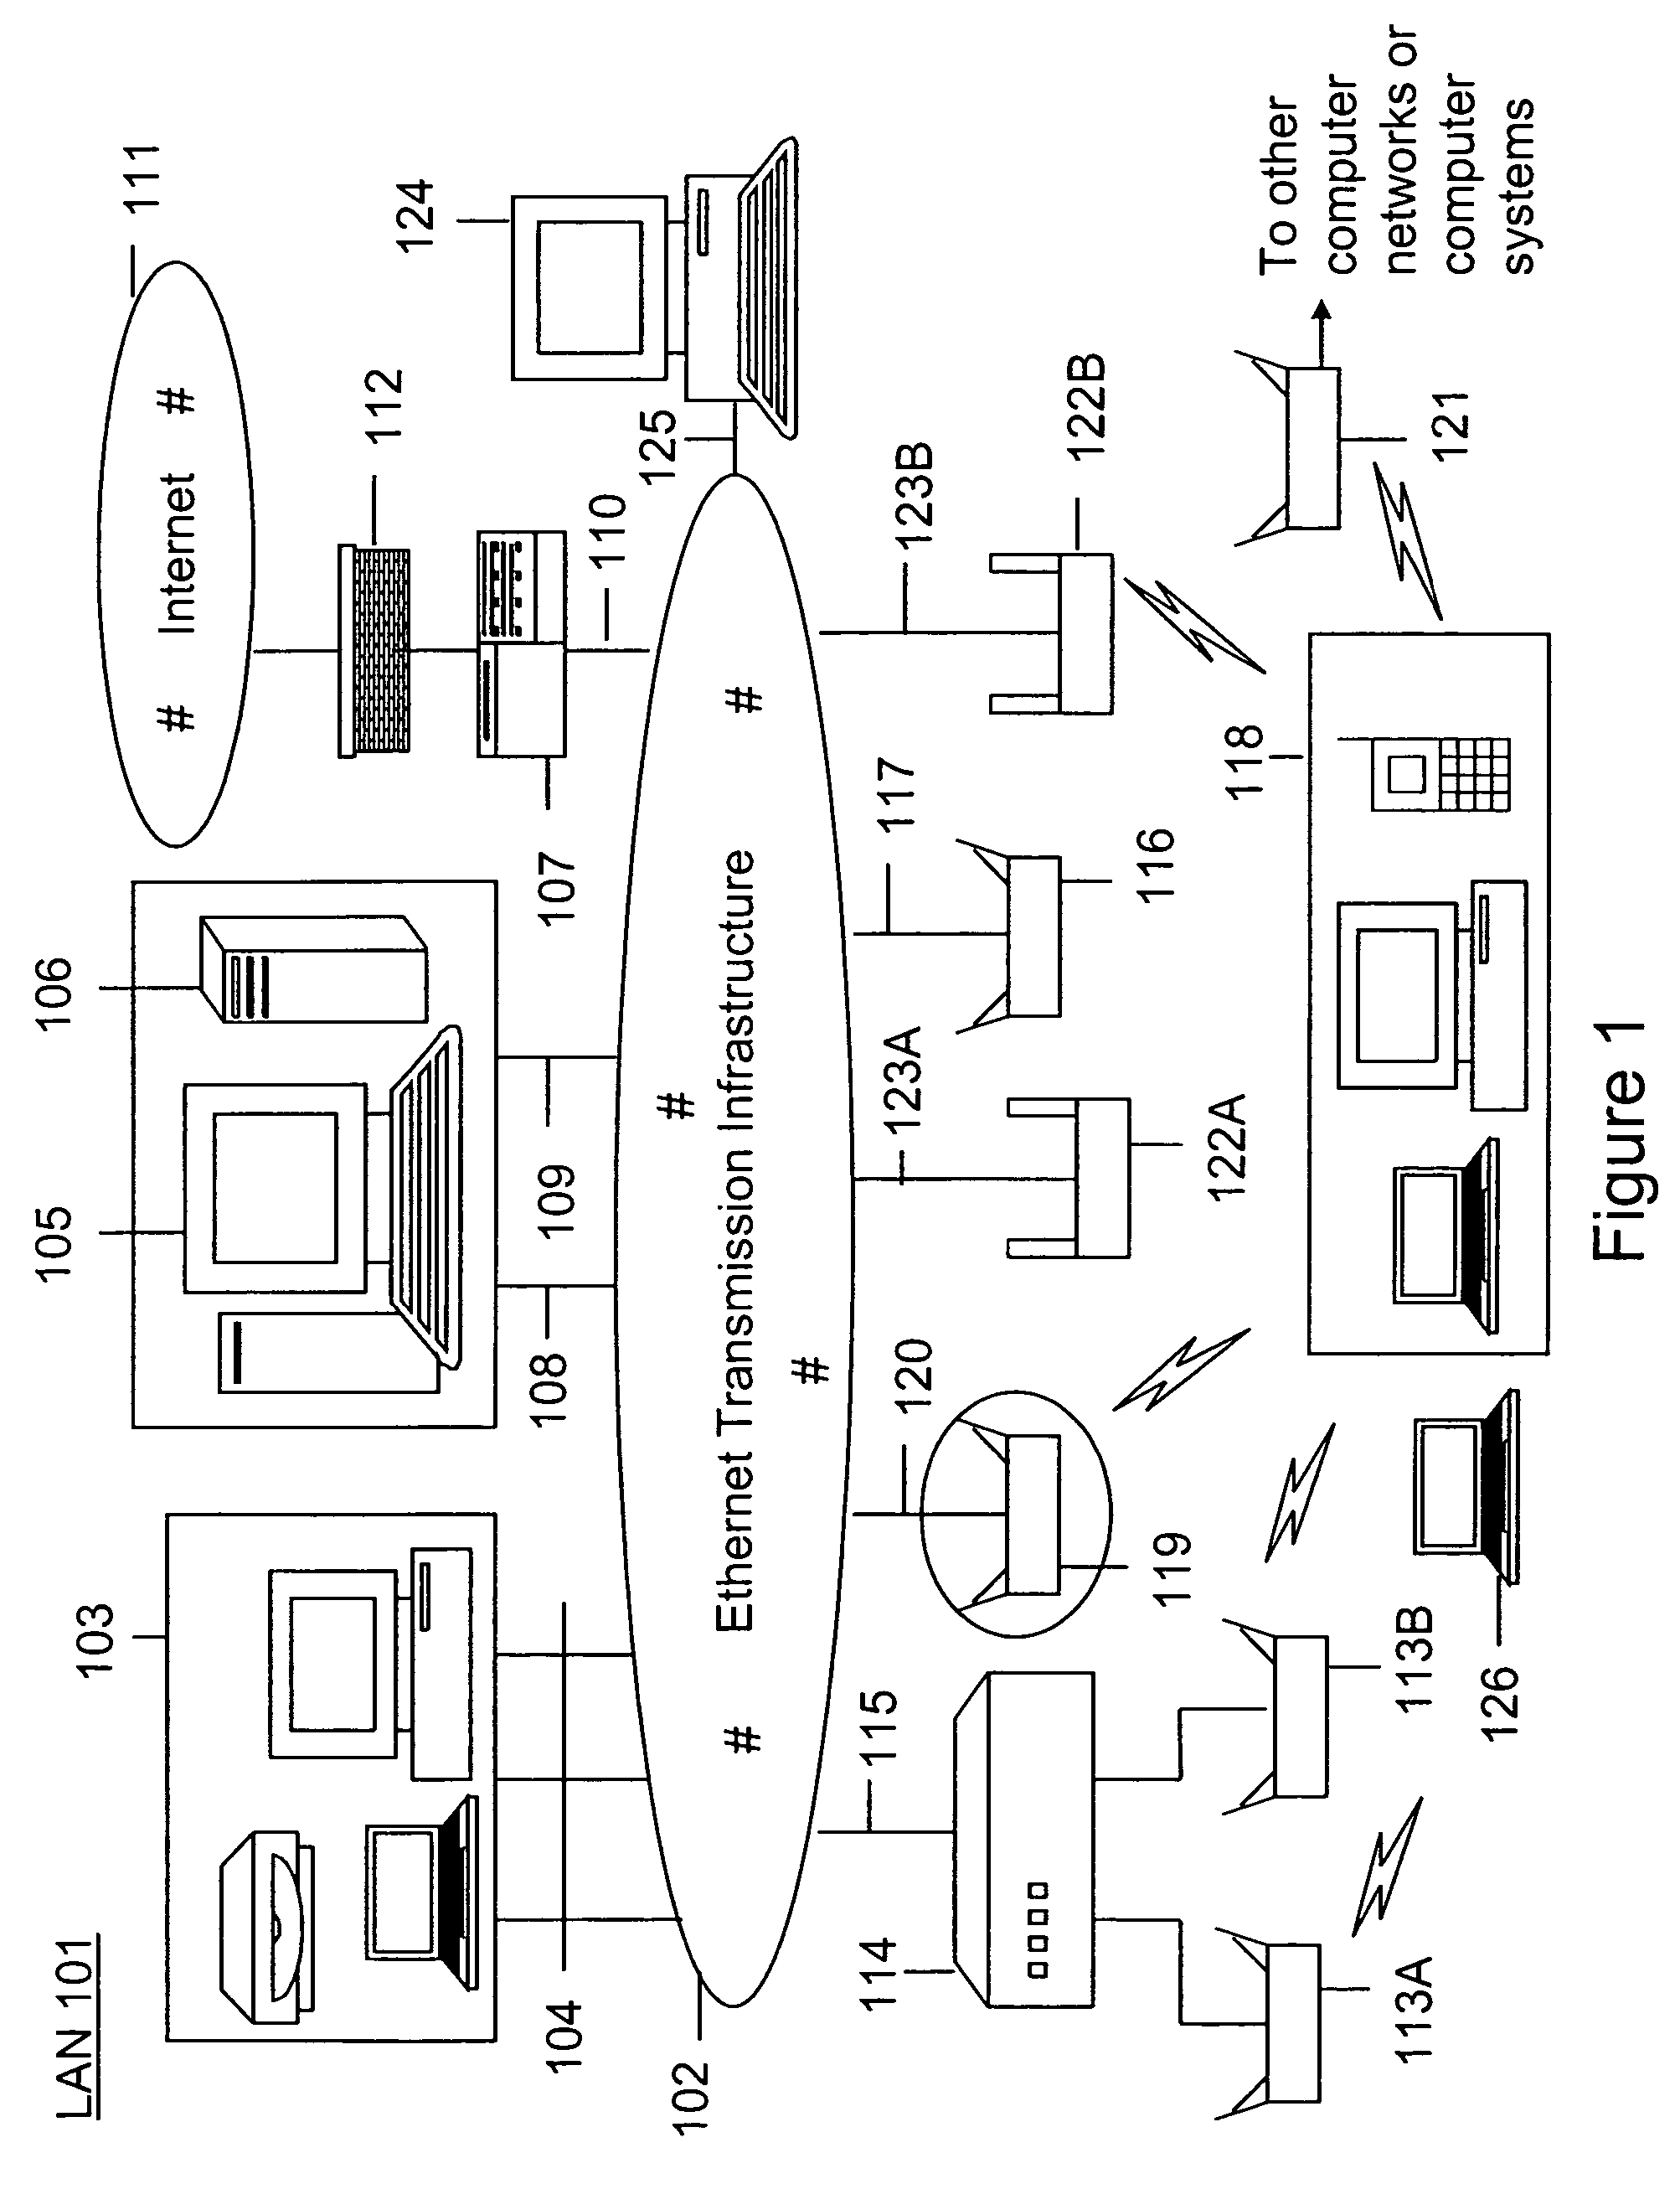 Method and system for detecting wireless access devices operably coupled to computer local area networks and related methods